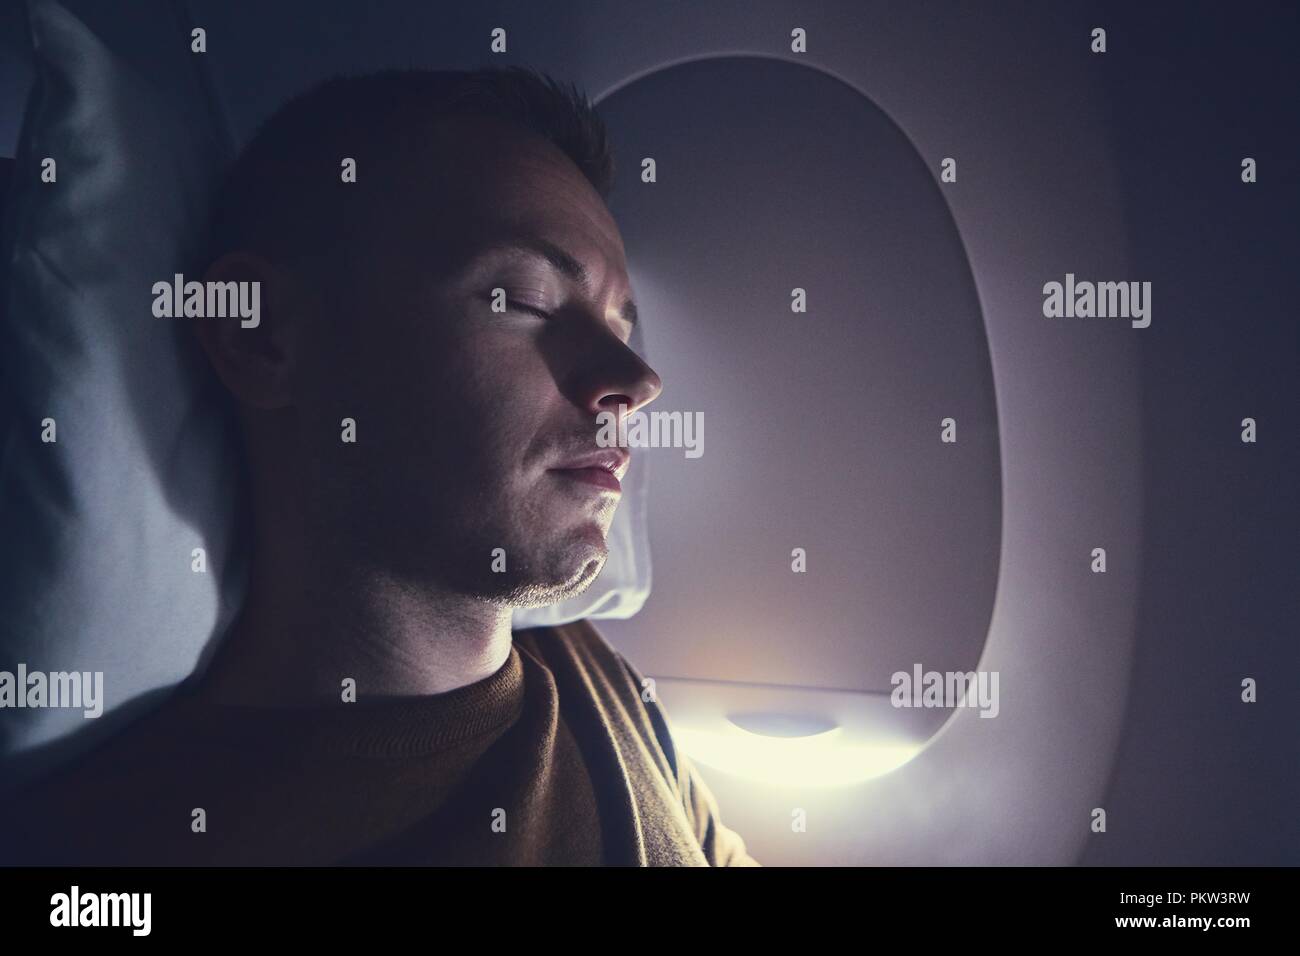 Traveling by airplane. Young passenger sleeping during flight. Stock Photo